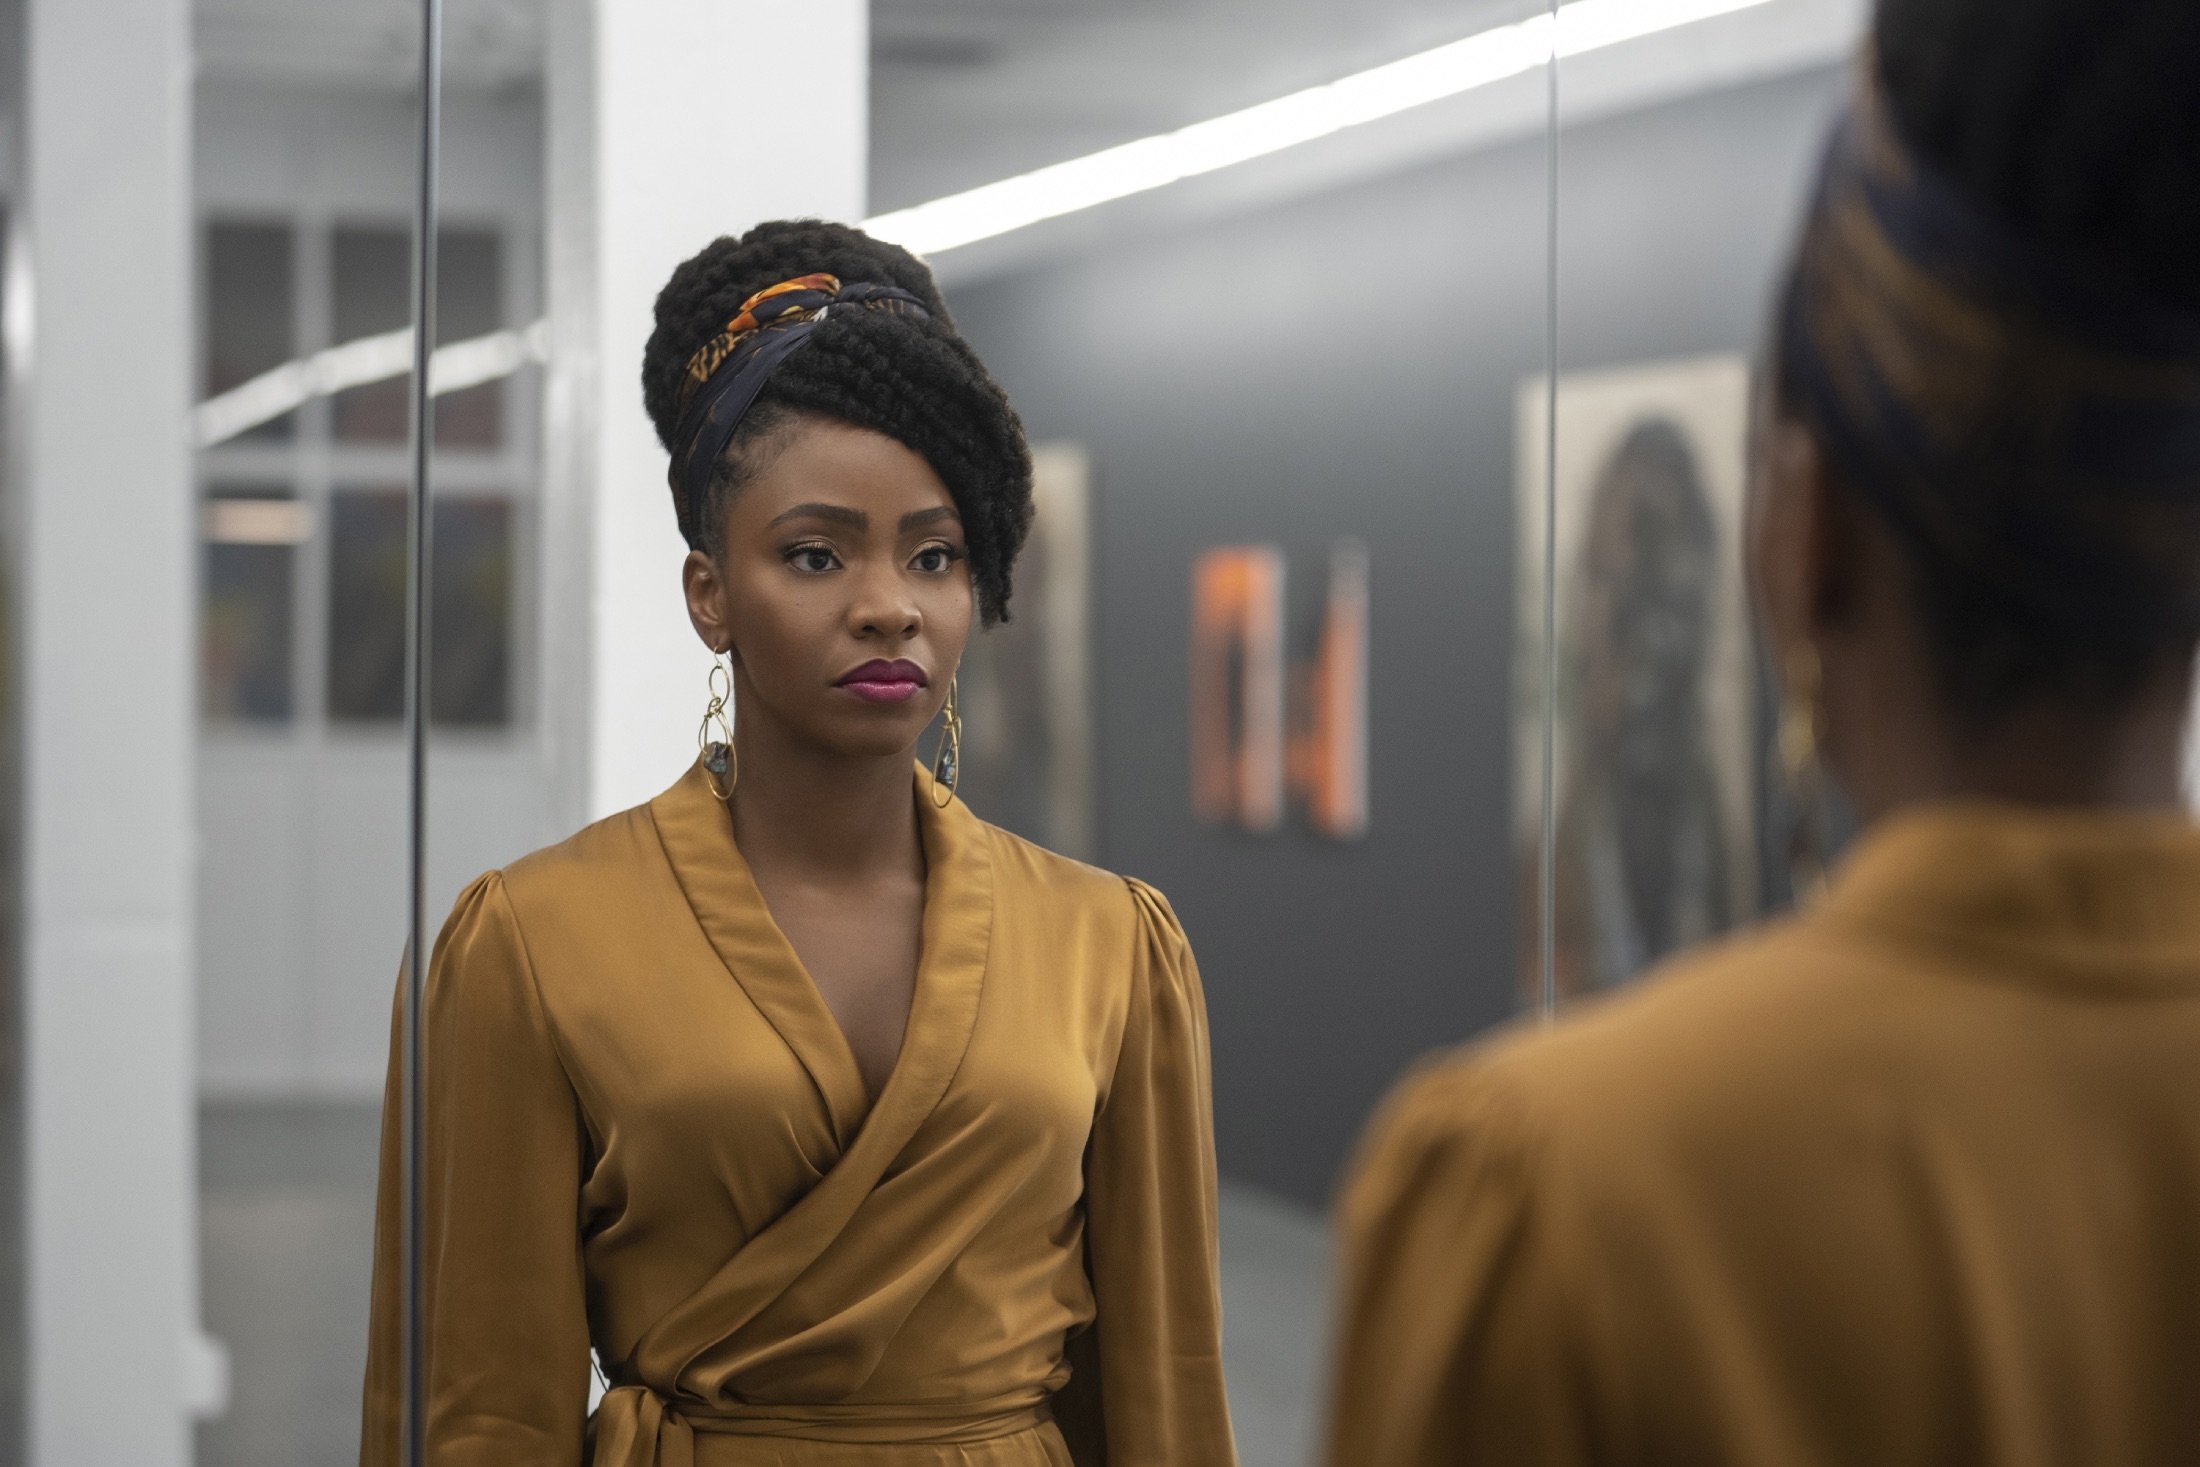 Teyonah Parris looks into a mirror, in a scene from the film “Candyman,” directed by Nia DaCosta. (AP Photo)